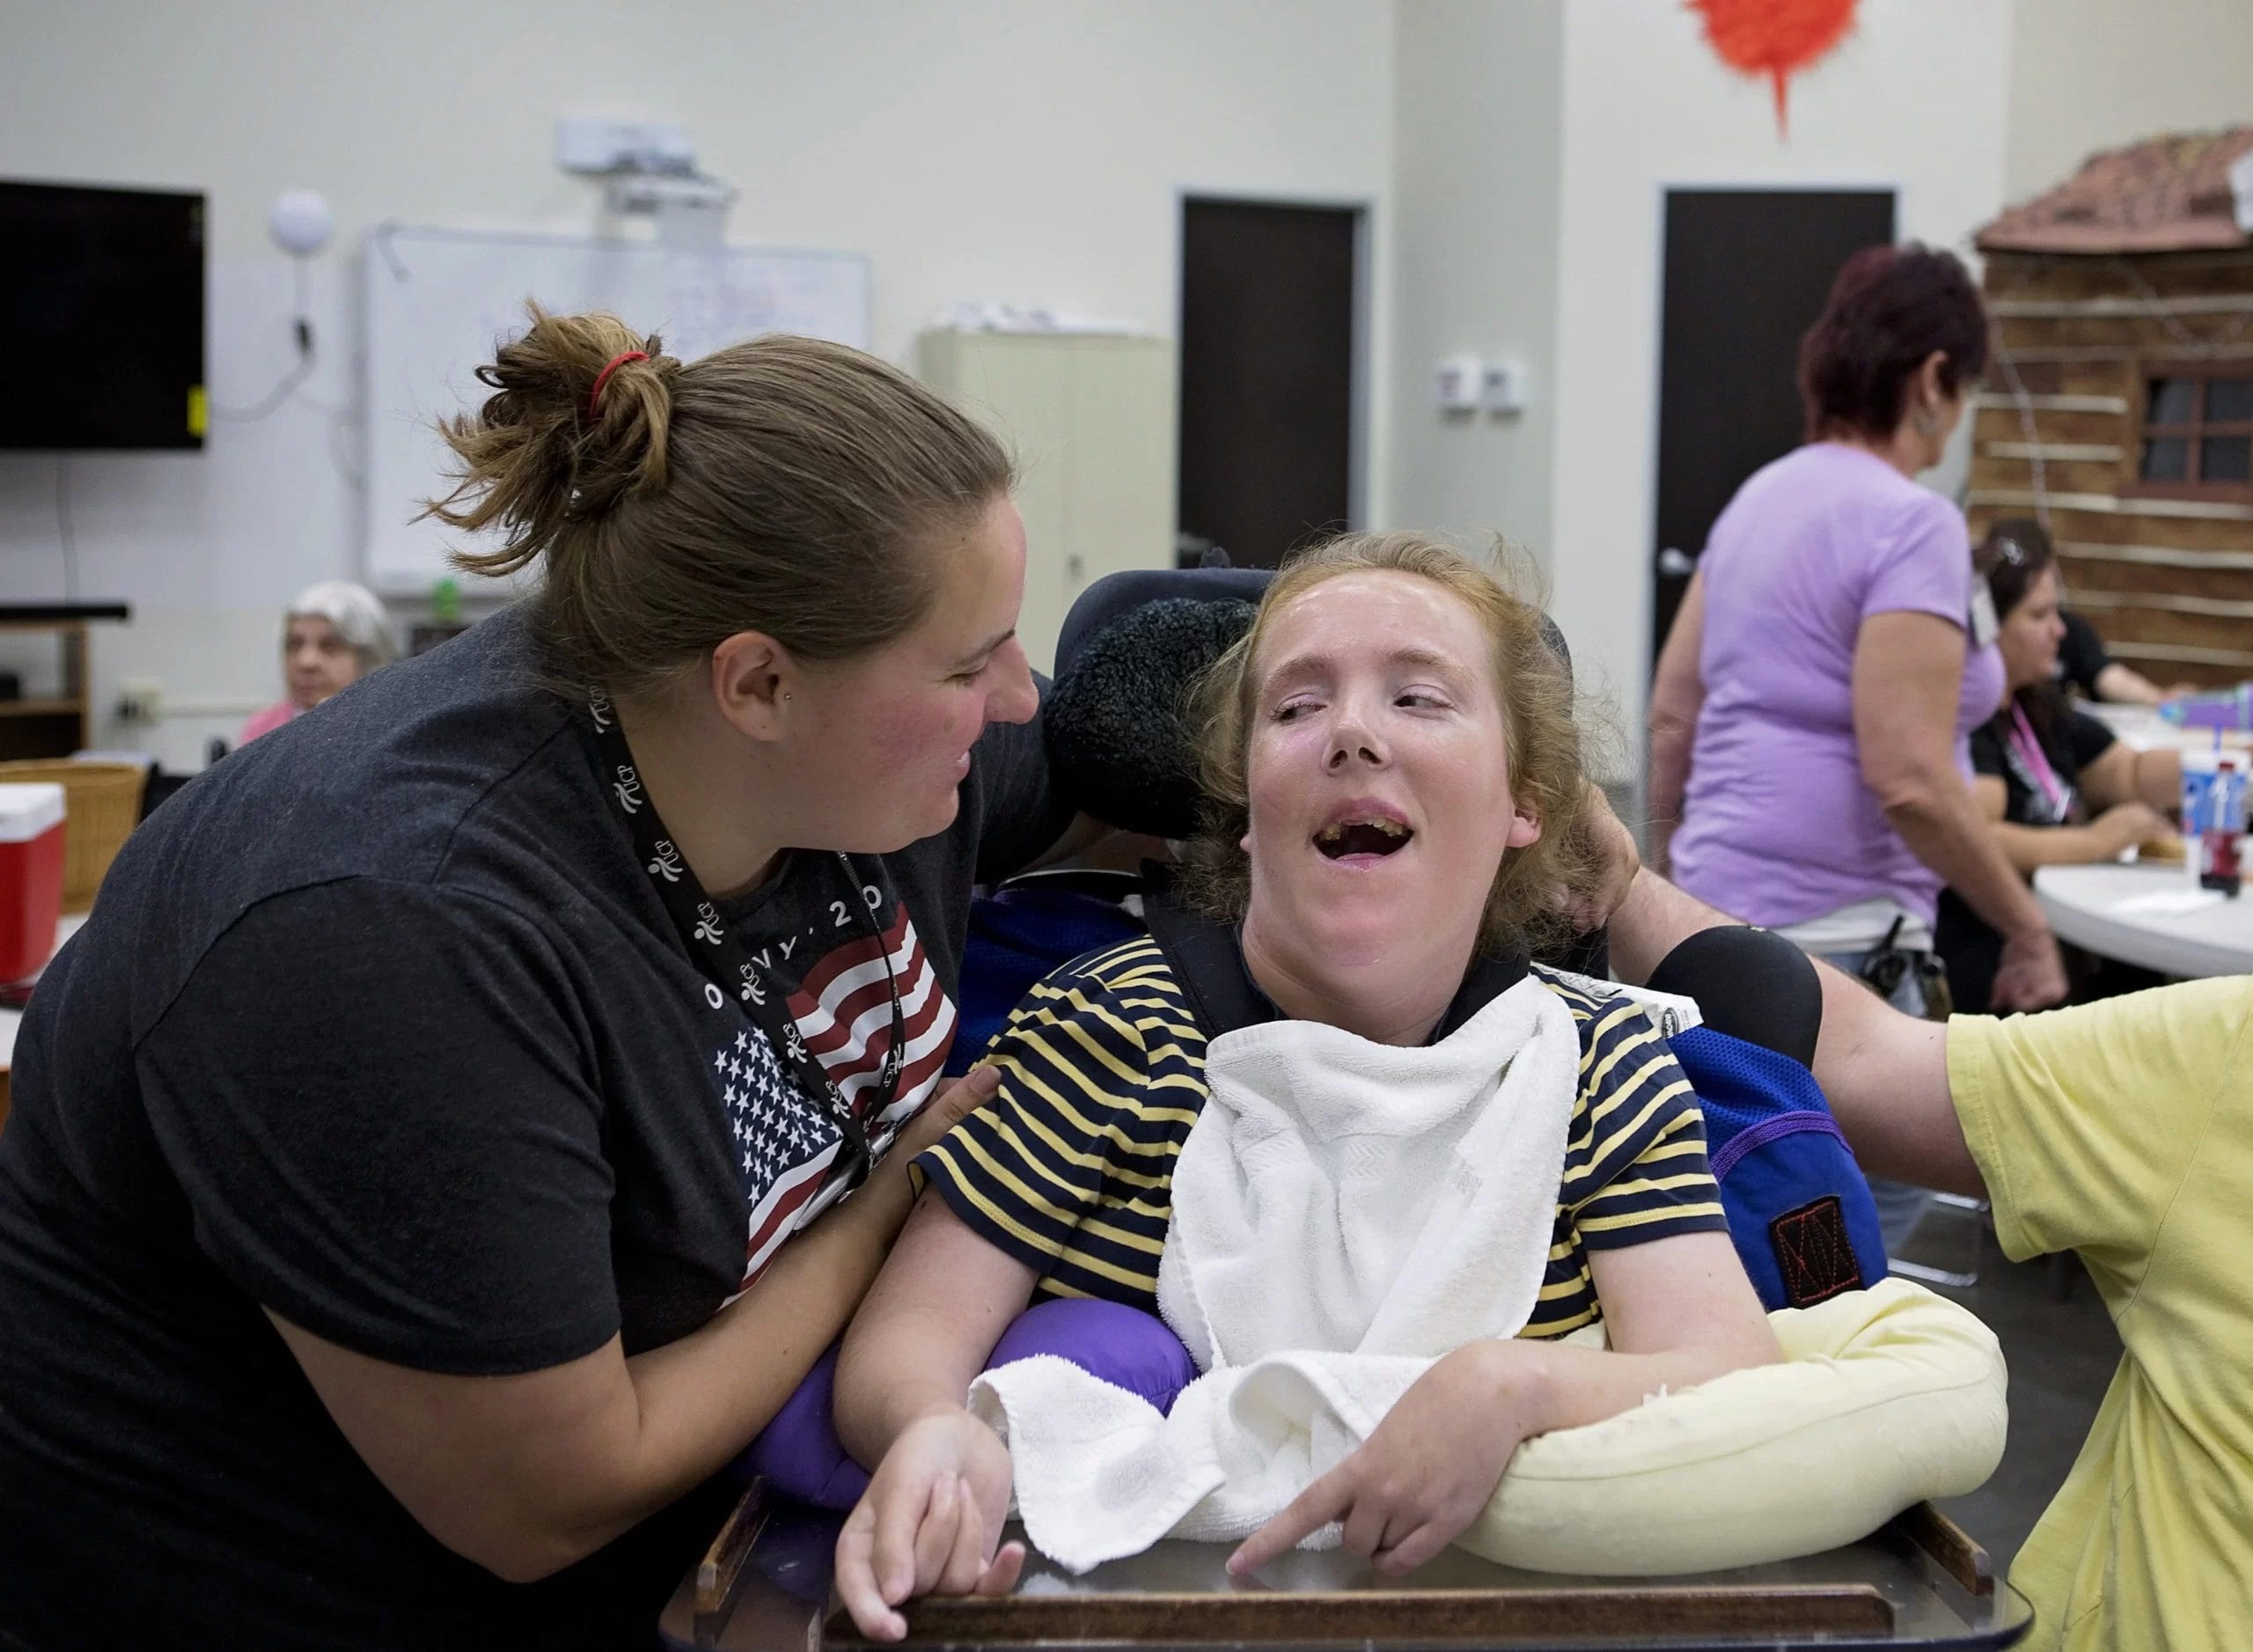 A girl receiving pediatric therapy in a wheelchair is assisted by a woman in a wheelchair at an early learning center.